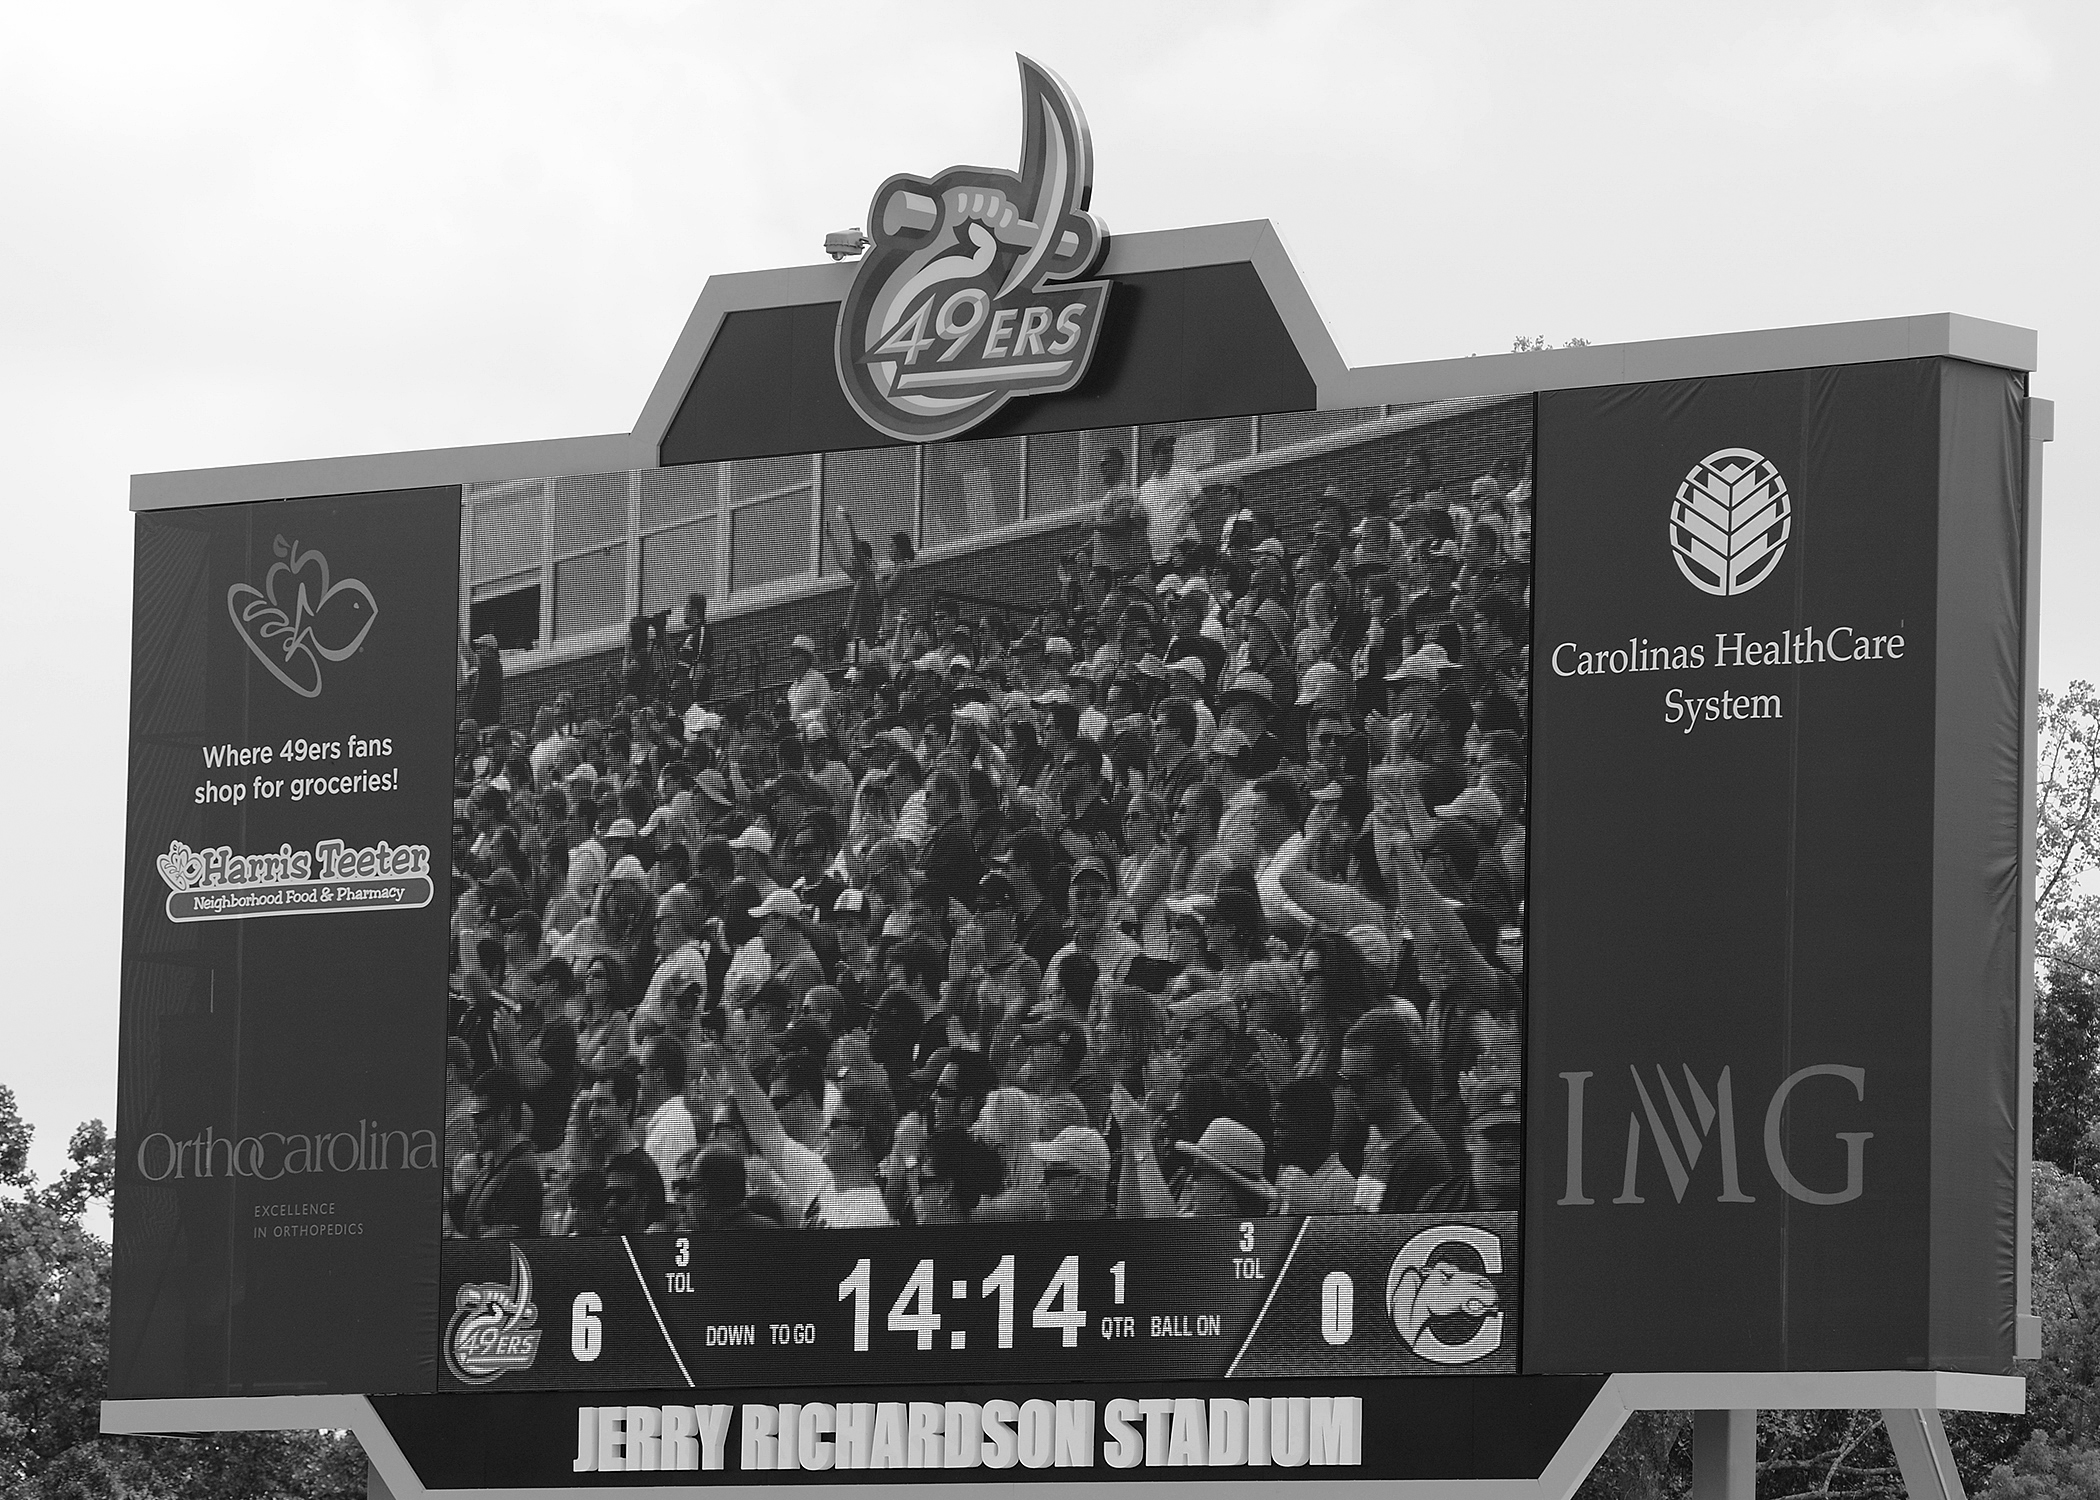 The scoreboard with a screen that shows the crowd in the stands, the score, and sponsors.